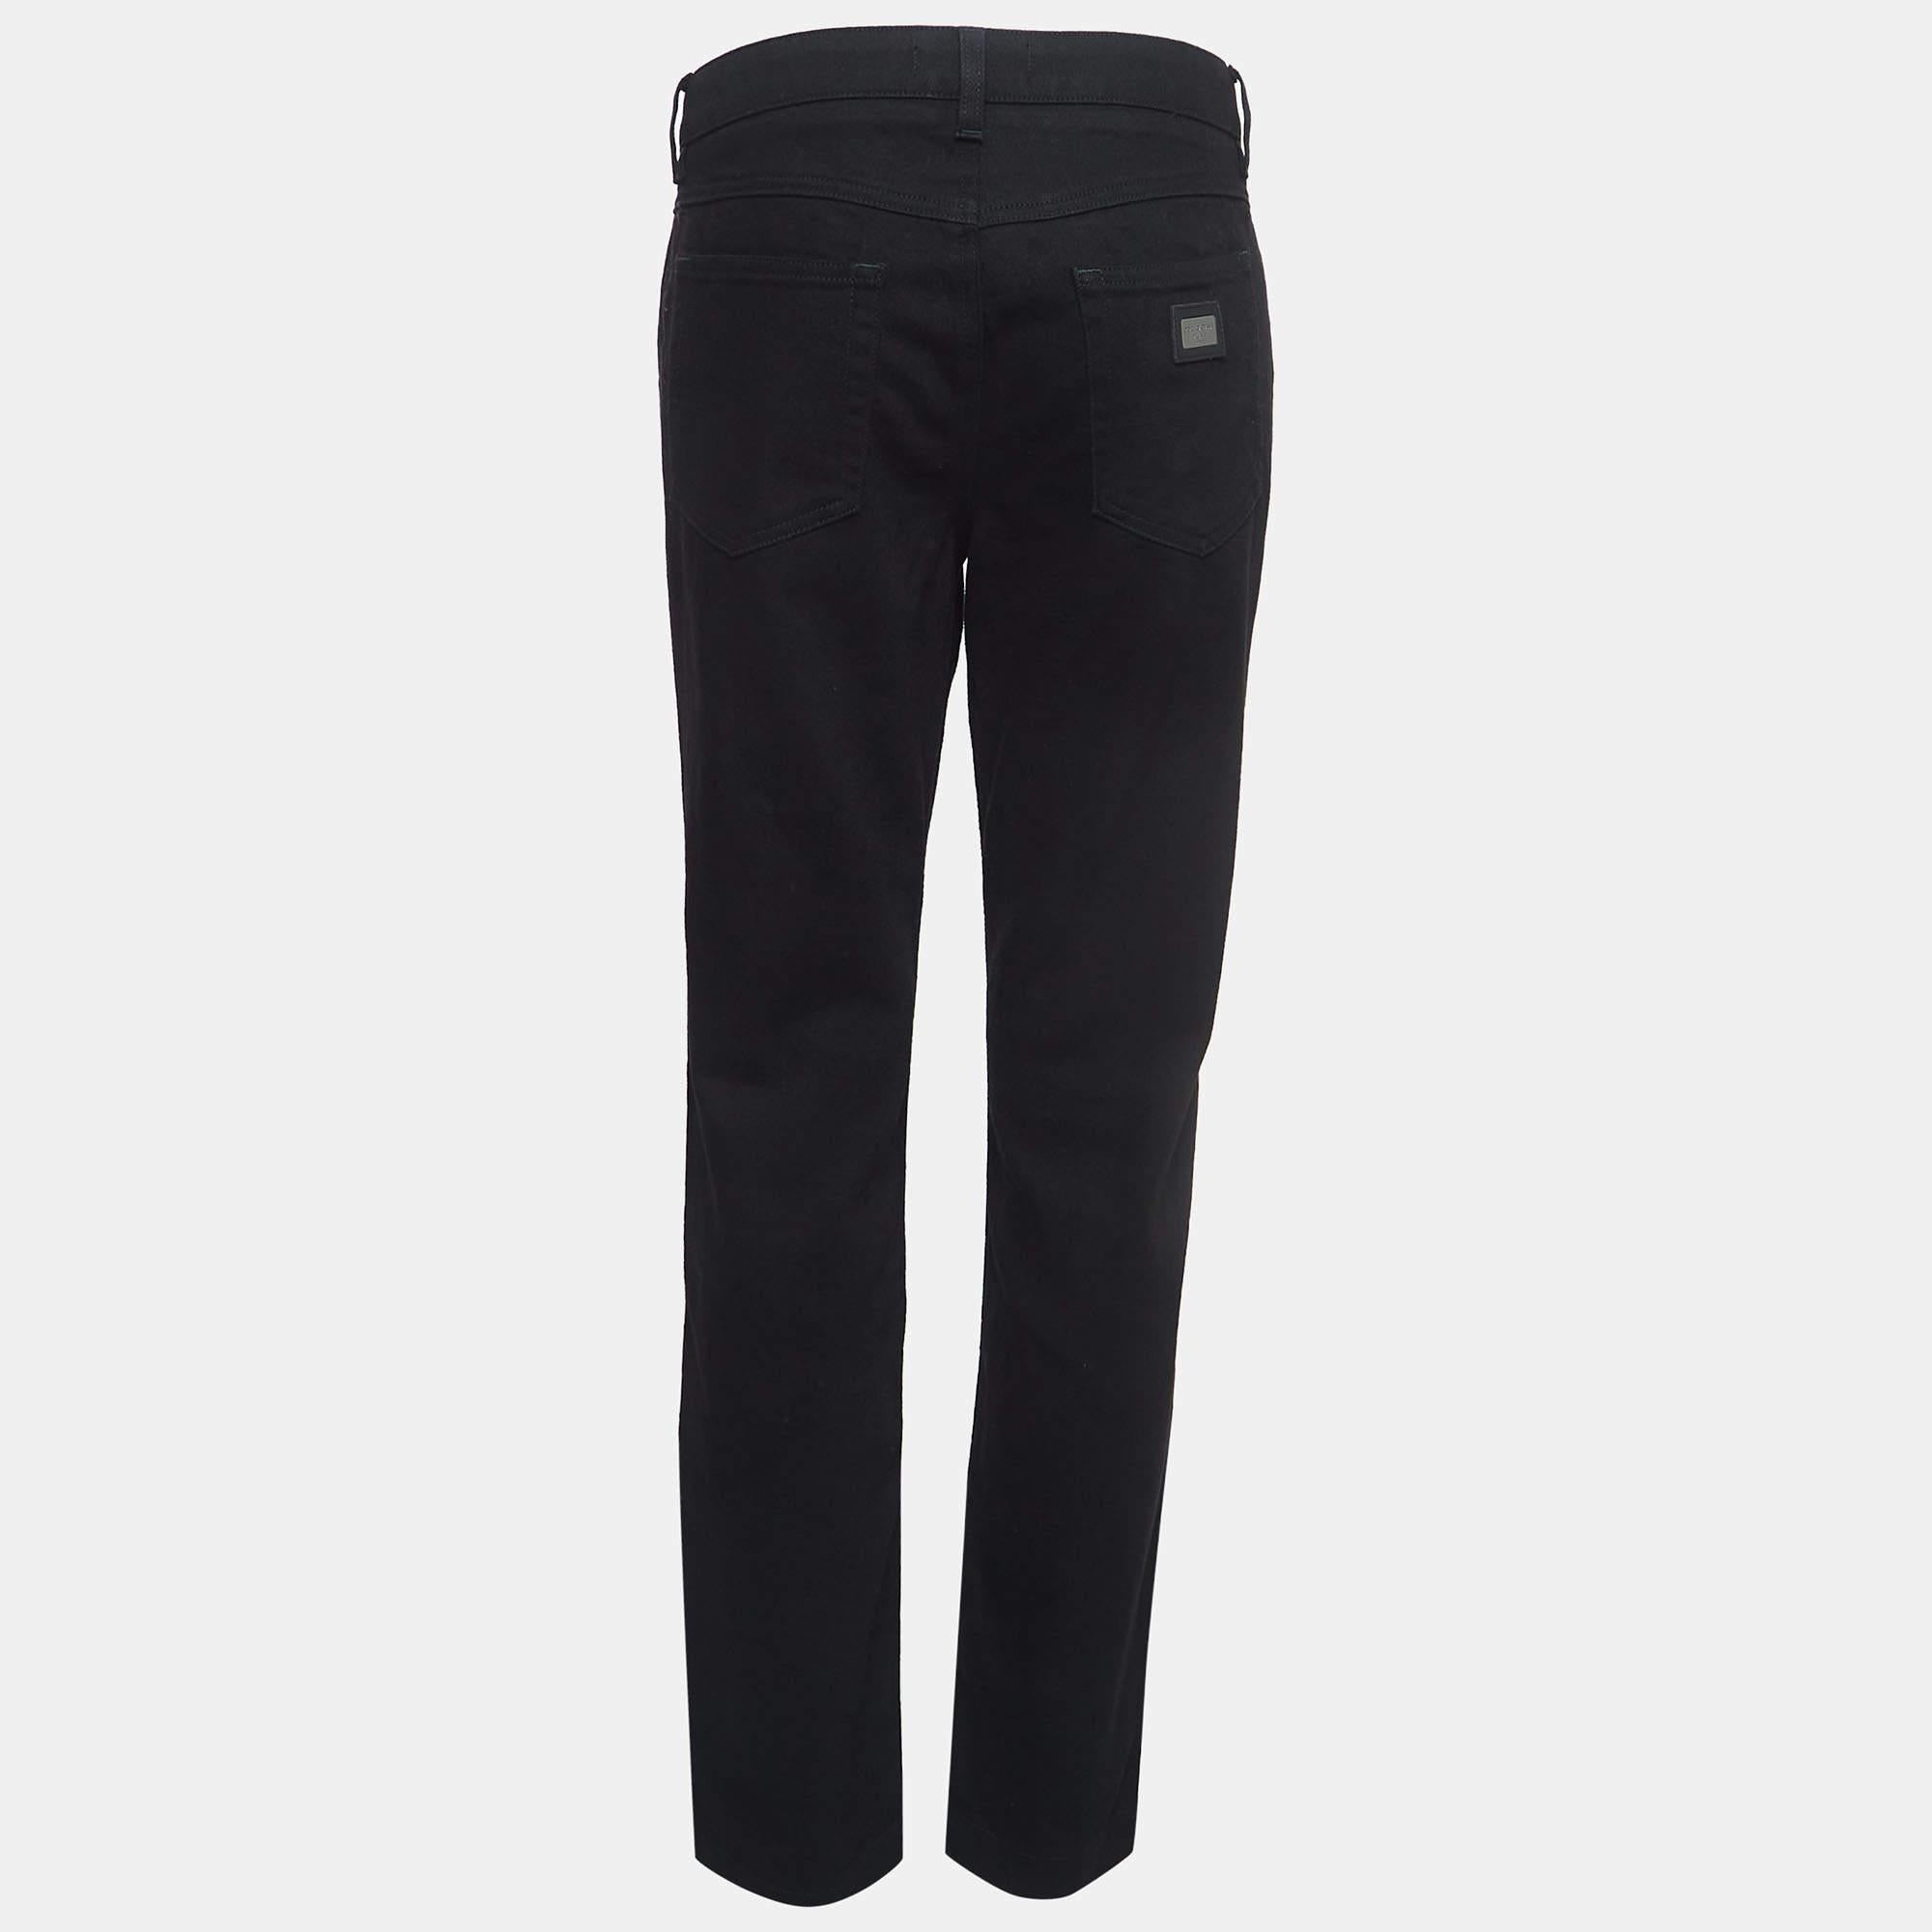 A good pair of jeans always makes the closet complete. This pair of jeans is tailored with such skill and style that it will be your favorite in no time. It will give you a comfortable, stylish fit.

Includes: Brand Tag

